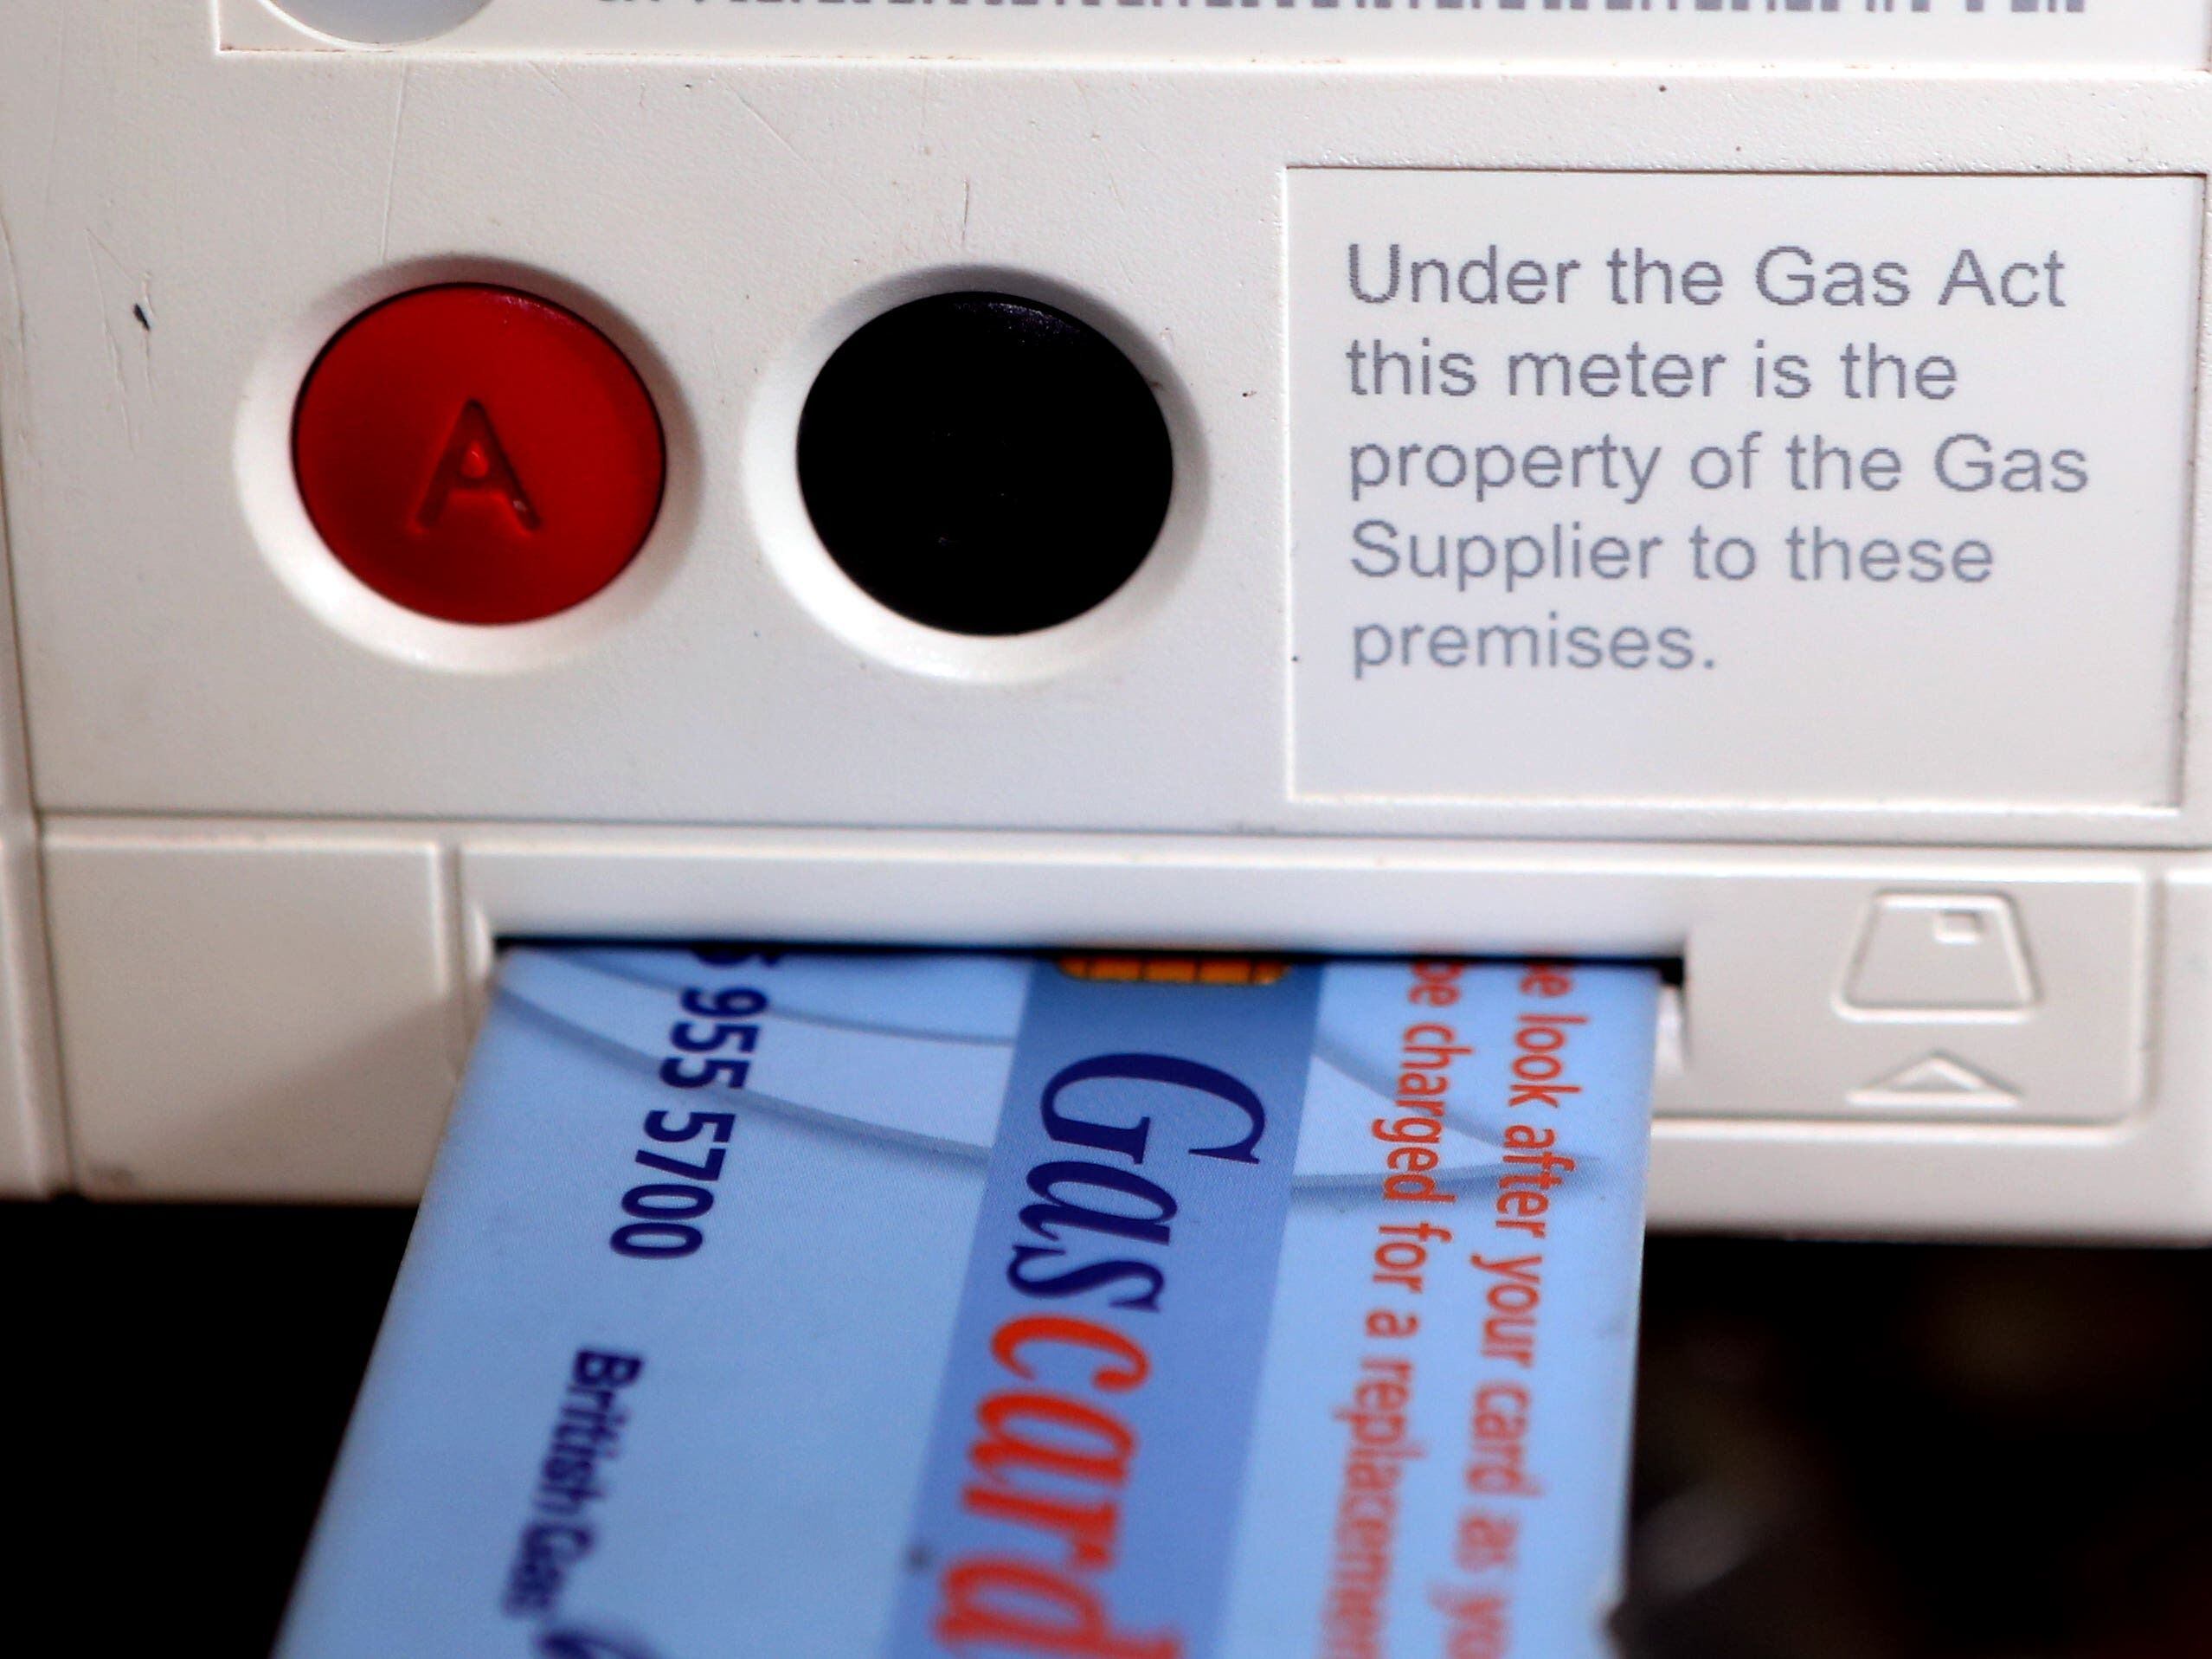 Citizens Advice fears rise in people ‘self-disconnecting’ from energy meters